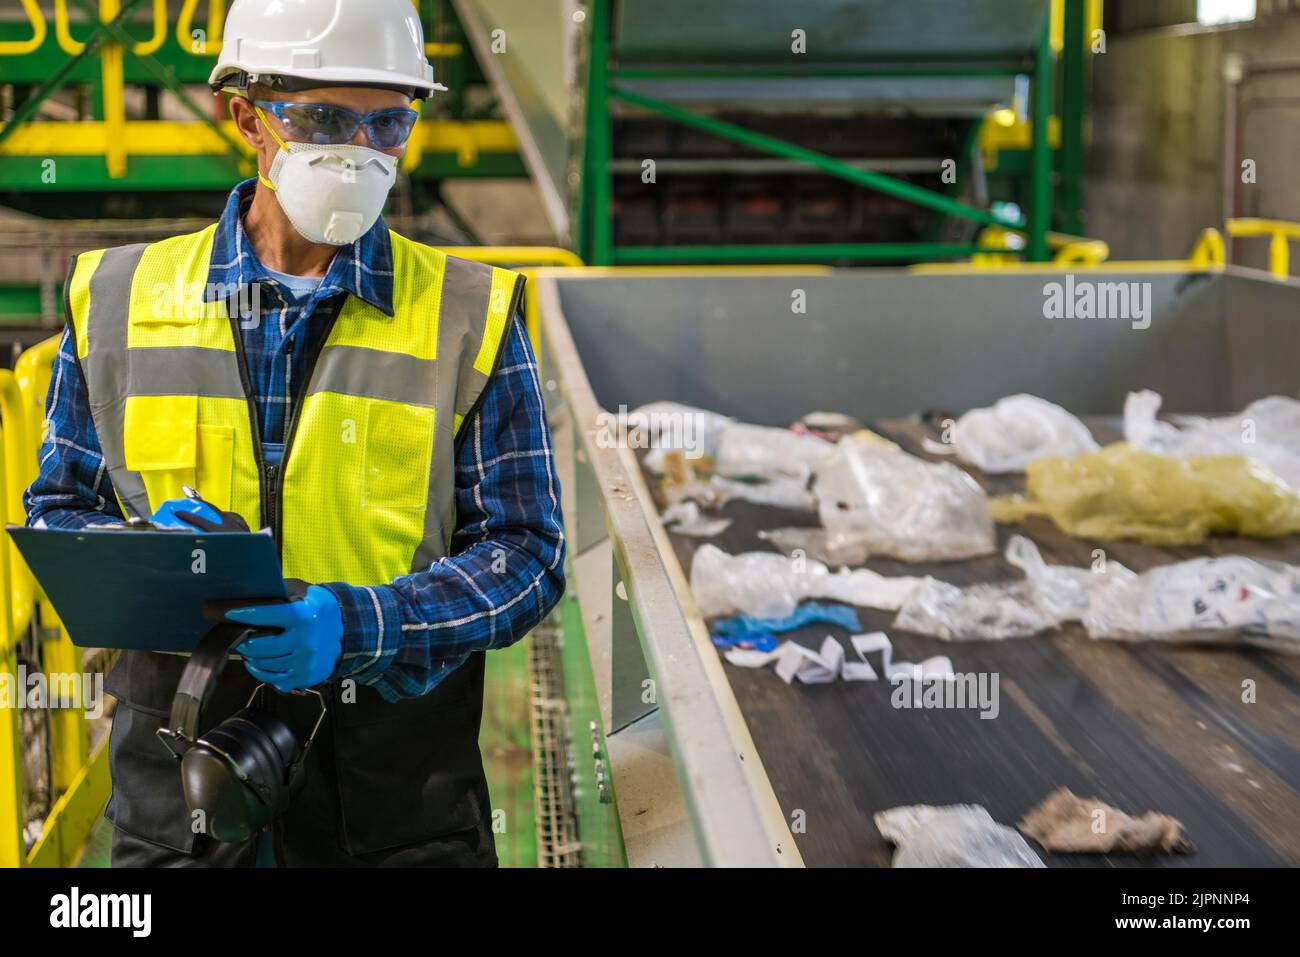 Waste Management Sorting Facility Caucasian Worker Preparing Documentation. Wearing Air Pollution Mask, Eyes Safety Glasses and a Hard Hat. Stock Photo